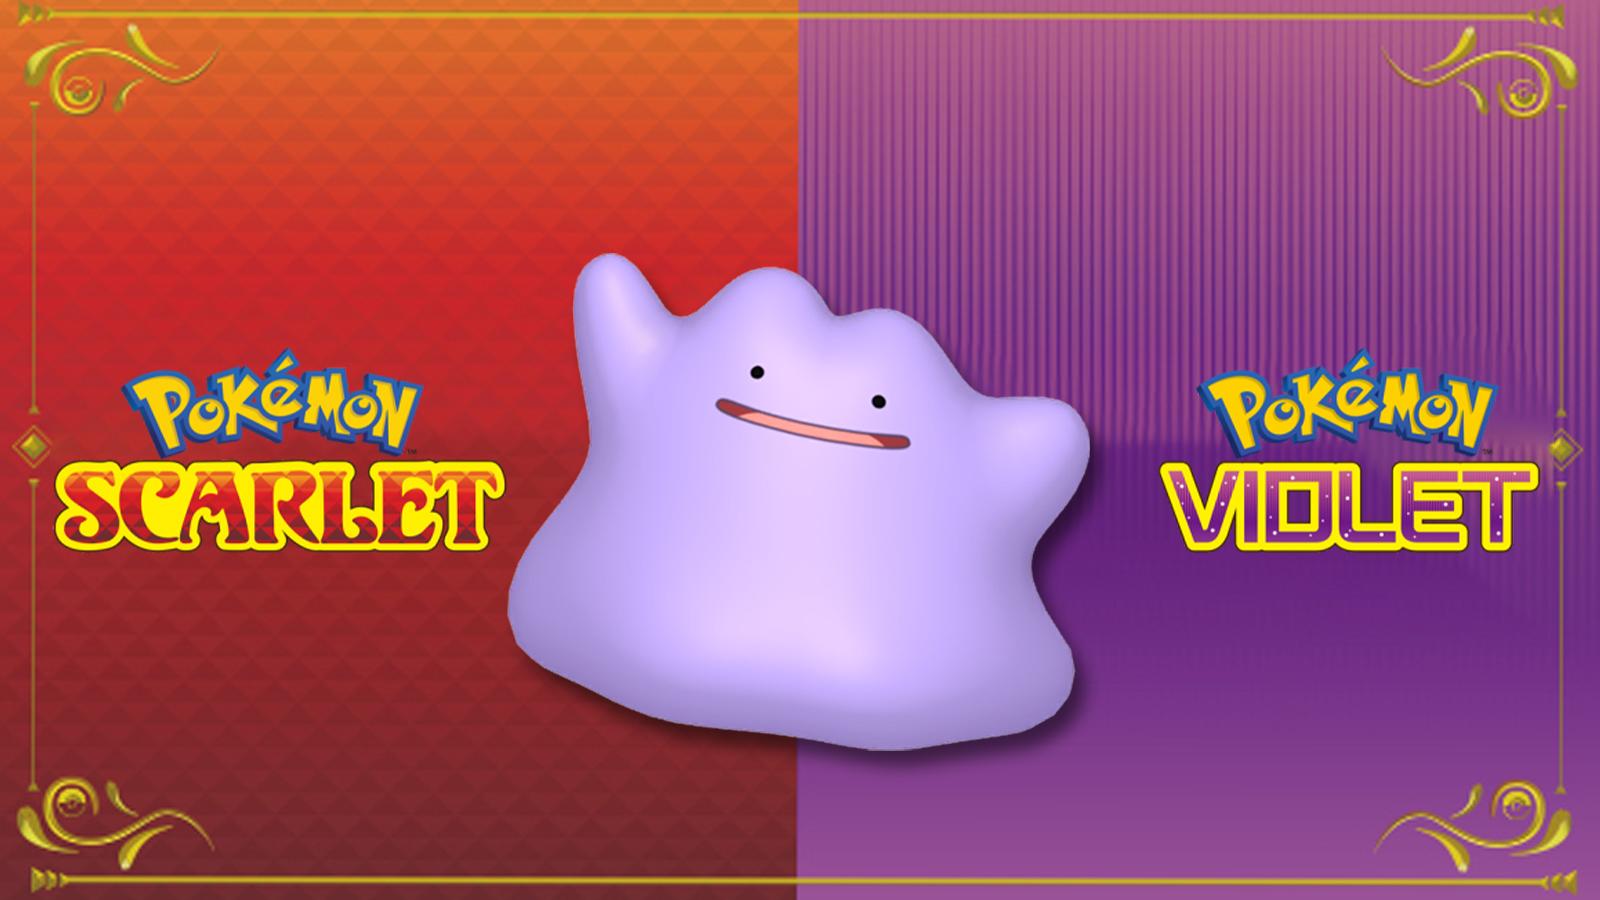 Shiny Ditto, How To Get Shiny Ditto in Pokemon Quest